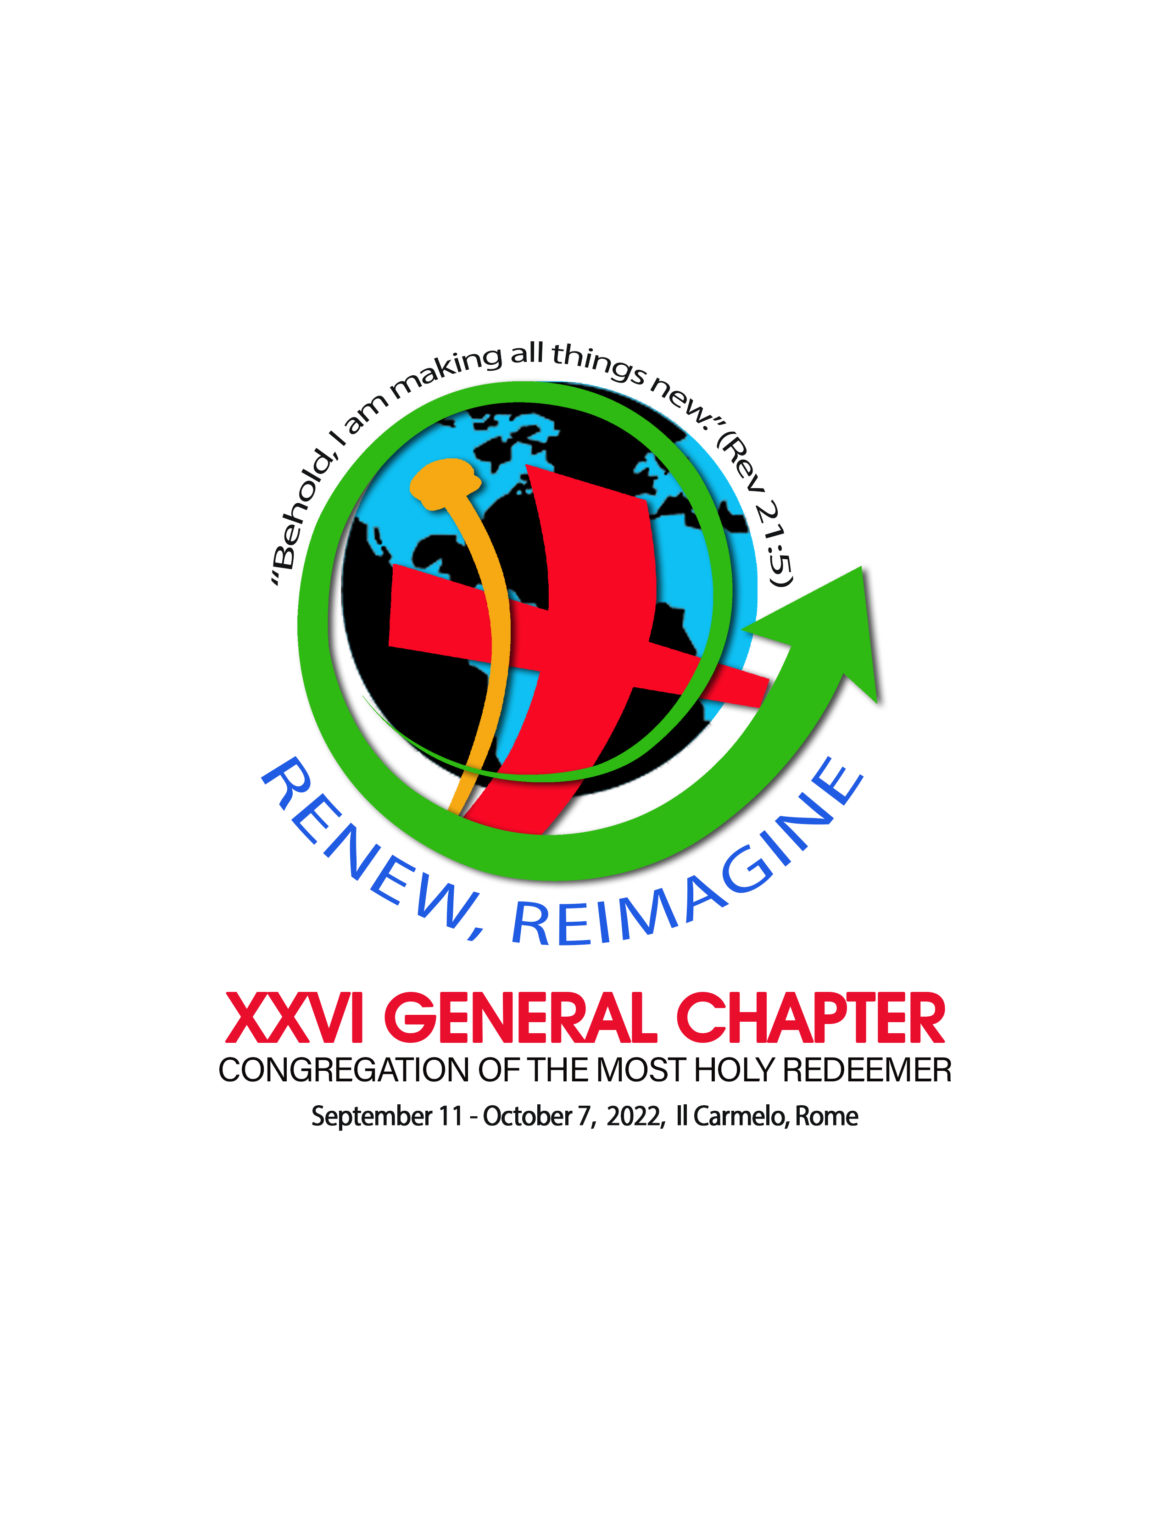 The emblem of the XXVI General Chapter